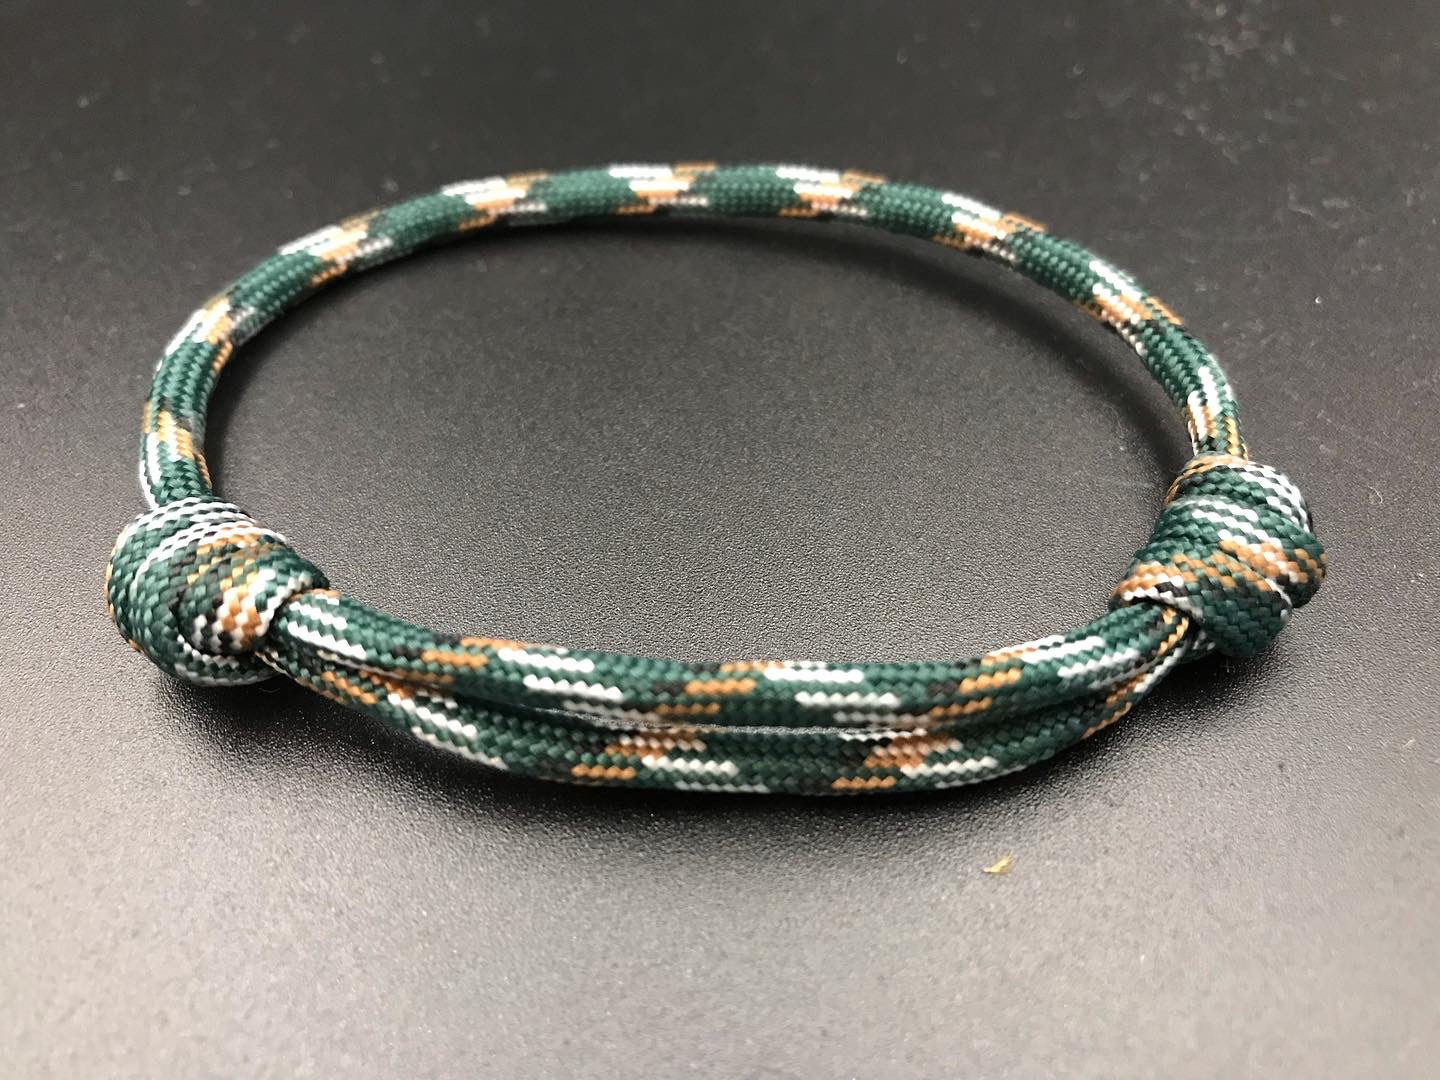 All Paracord products